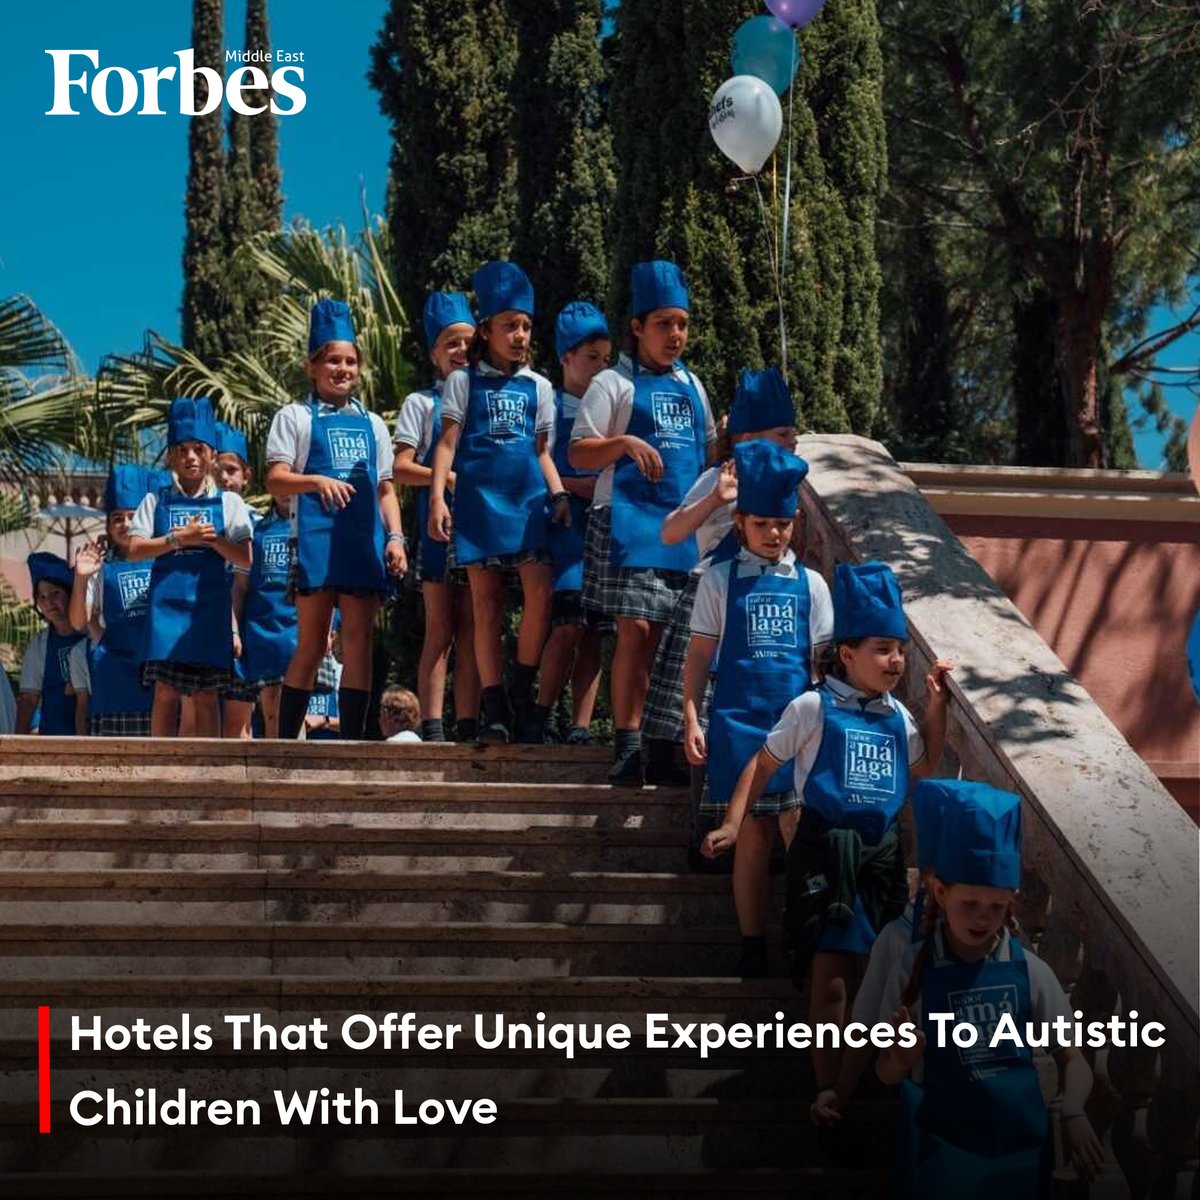 These hotels are developing various recreational programs with specially trained employees to offer autistic children an enjoyable experience. #Forbes #Autism For more details: 🔗 on.forbesmiddleeast.com/d0ed96